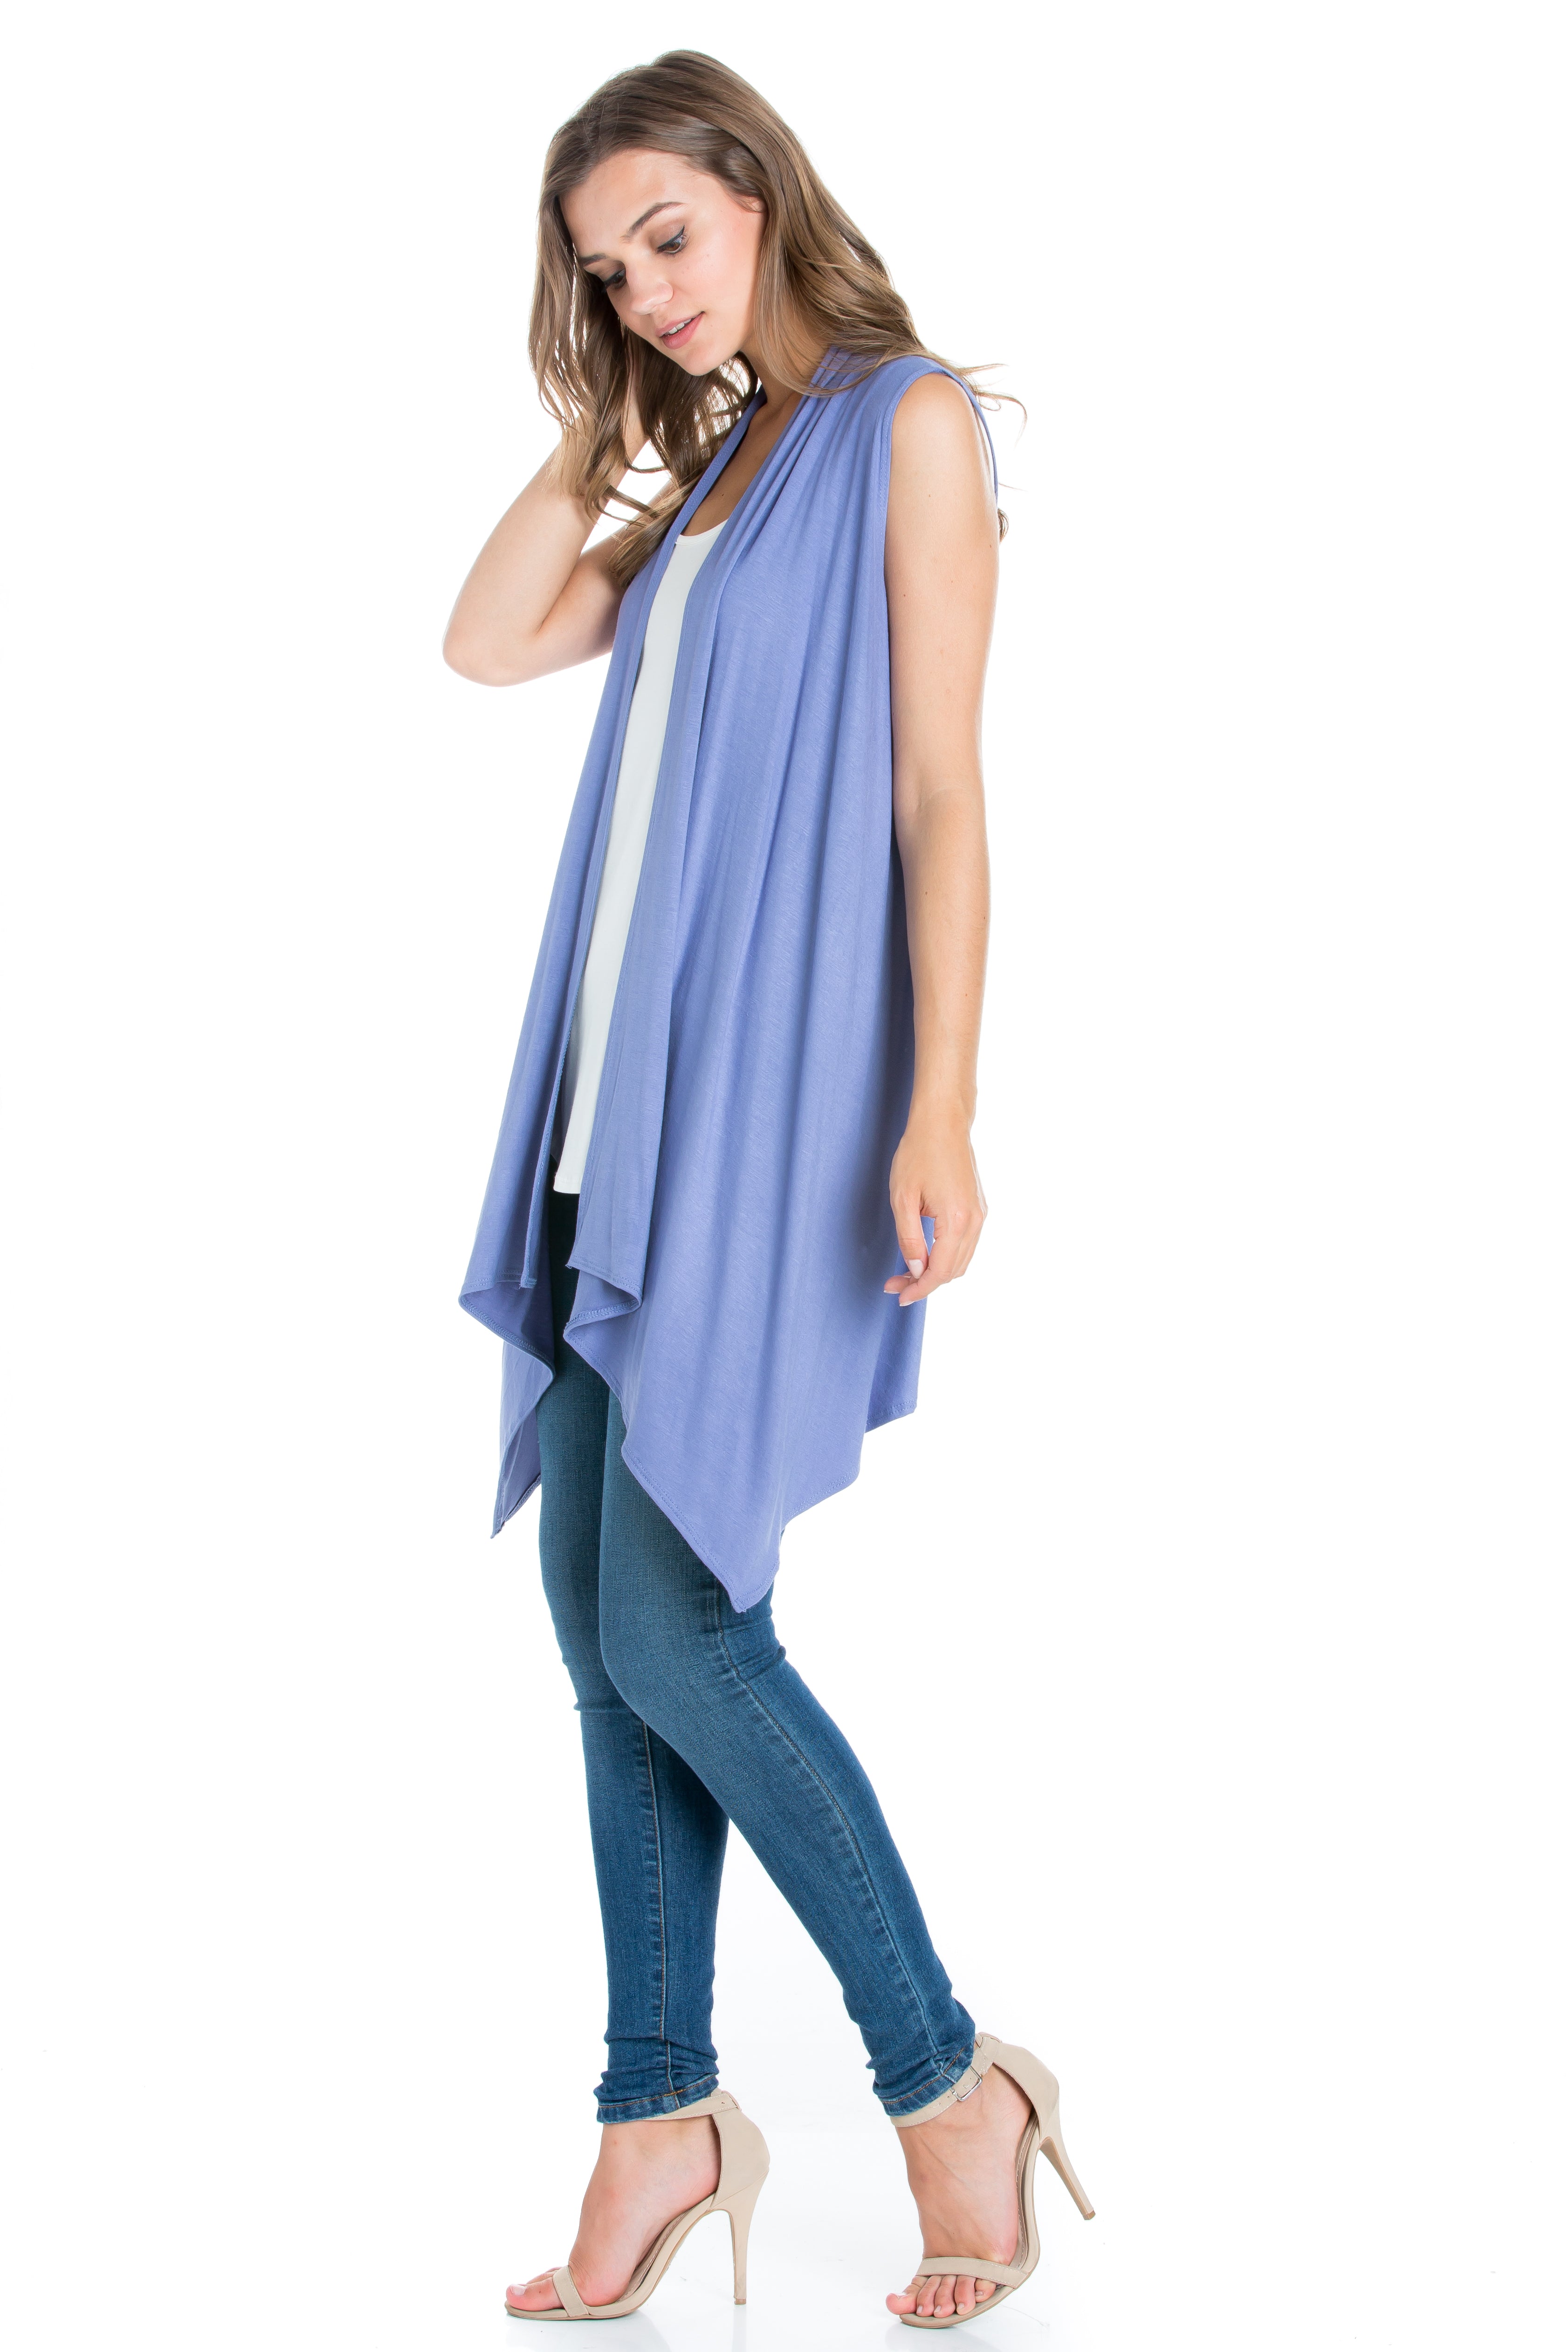 2071RS-Women's Sleeveless Open Front Cardigan | Made in USA | Azules Wholesale